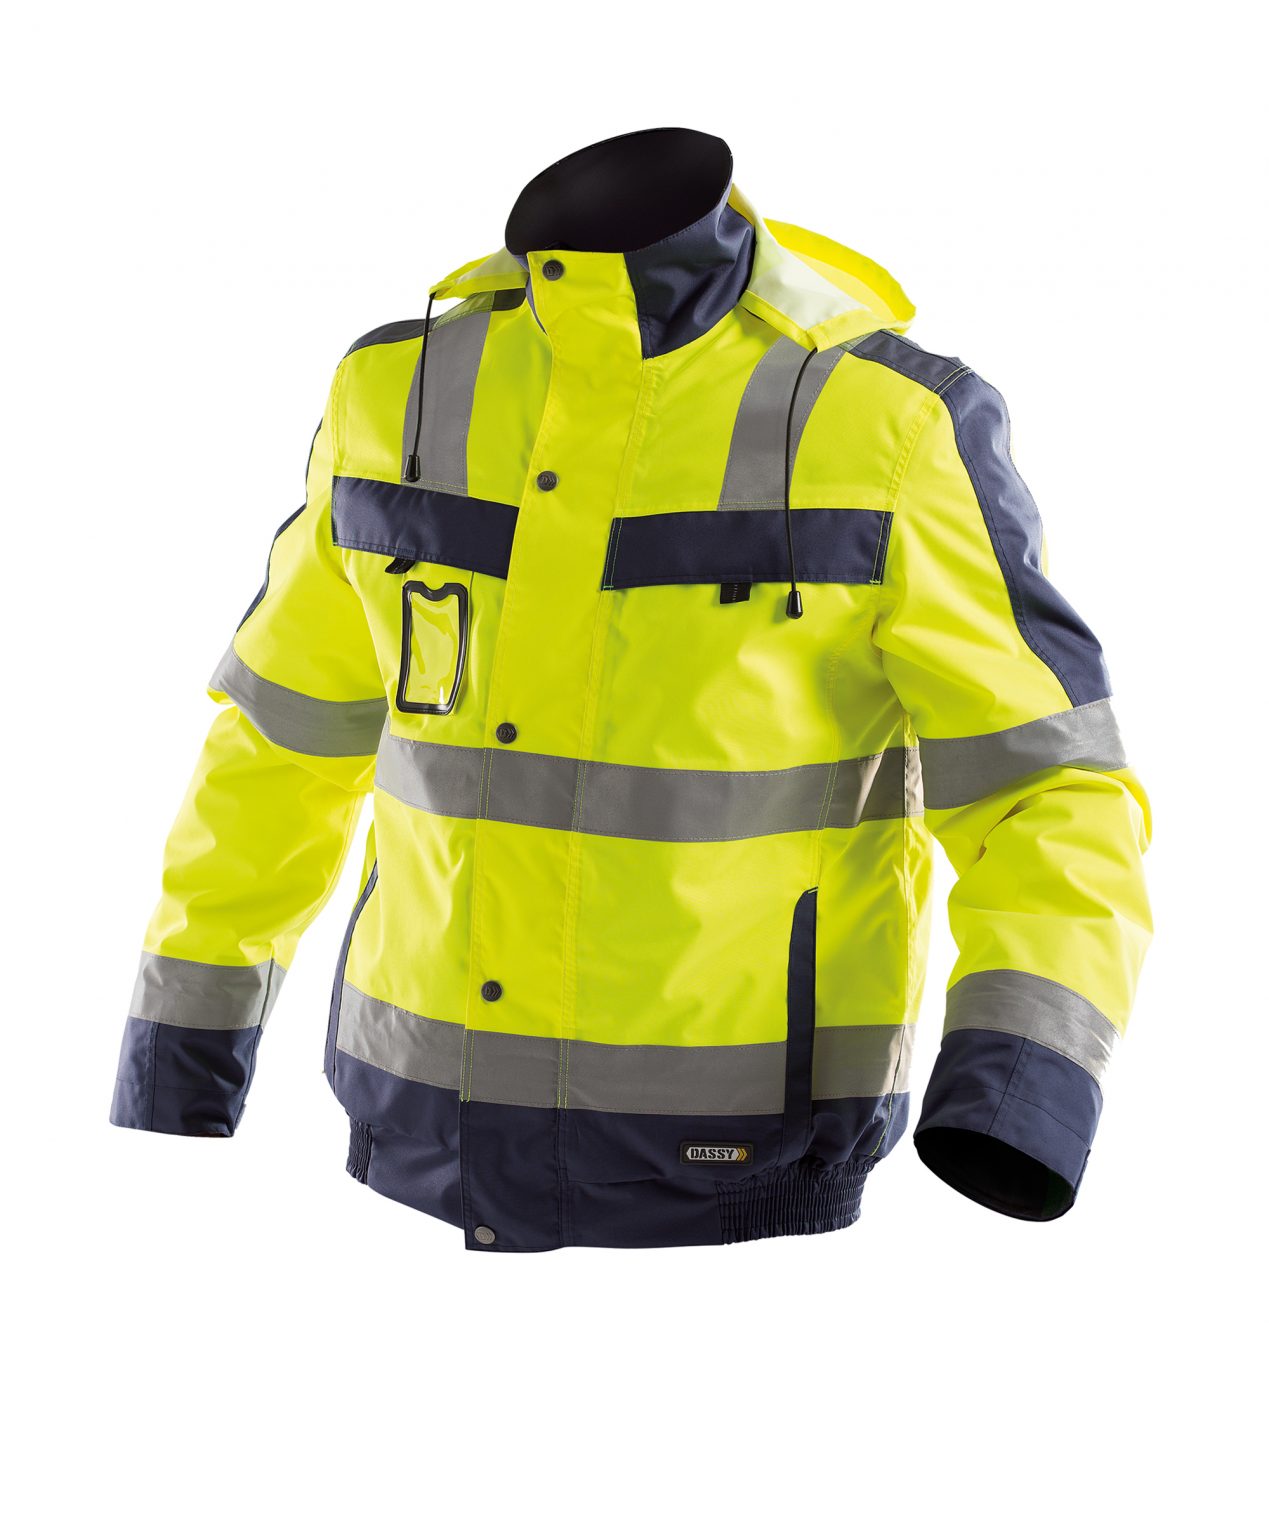 lima high visibility winter jacket fluo yellow navy front 1